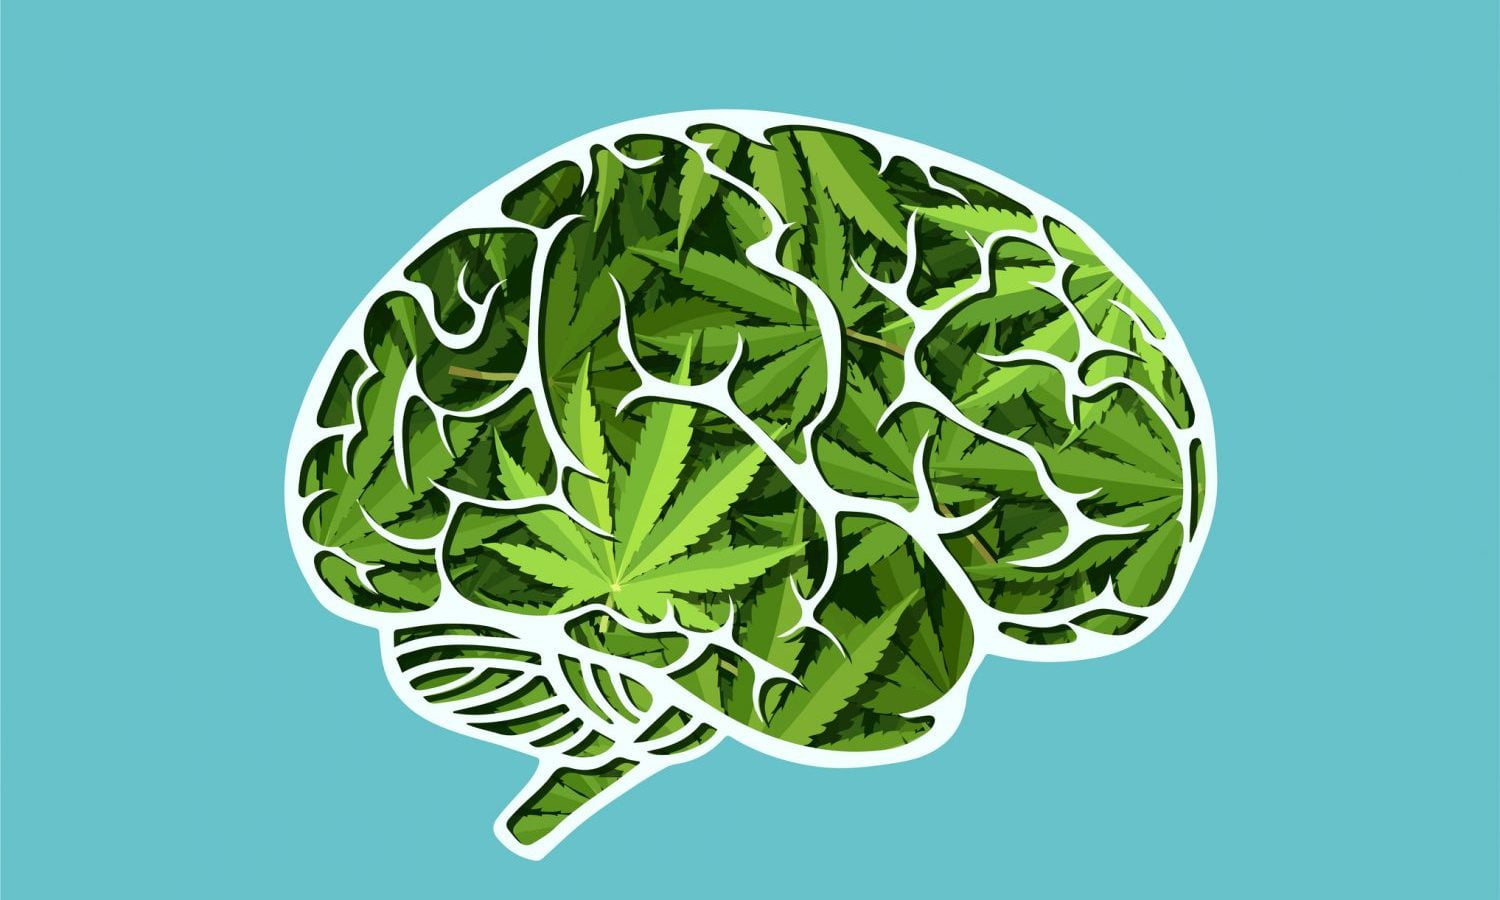 High-Strength THC Balanced With CBD Is Better For Your Brain, Study Shows